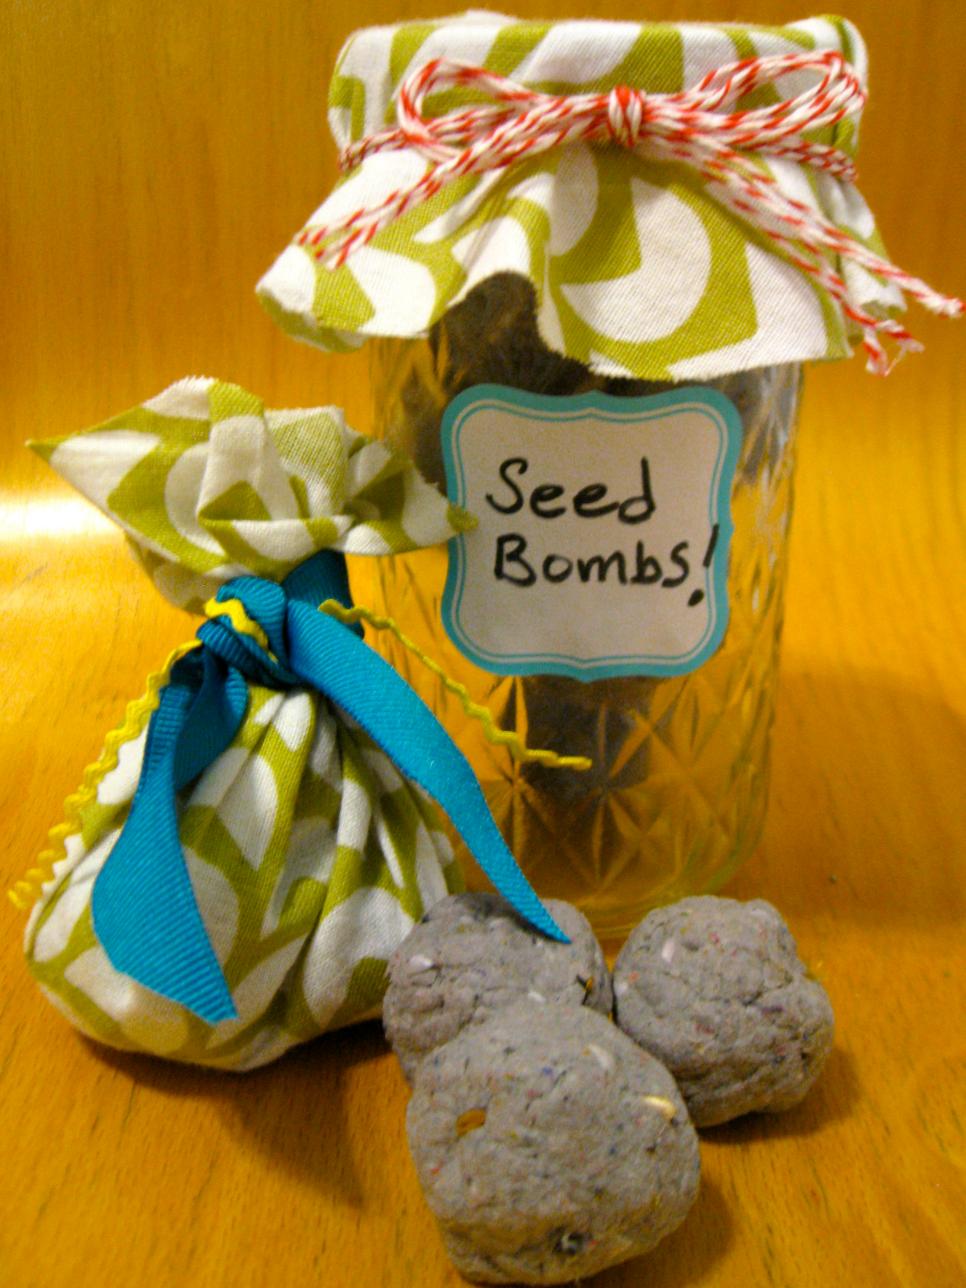 Seed bombs in a gift jar